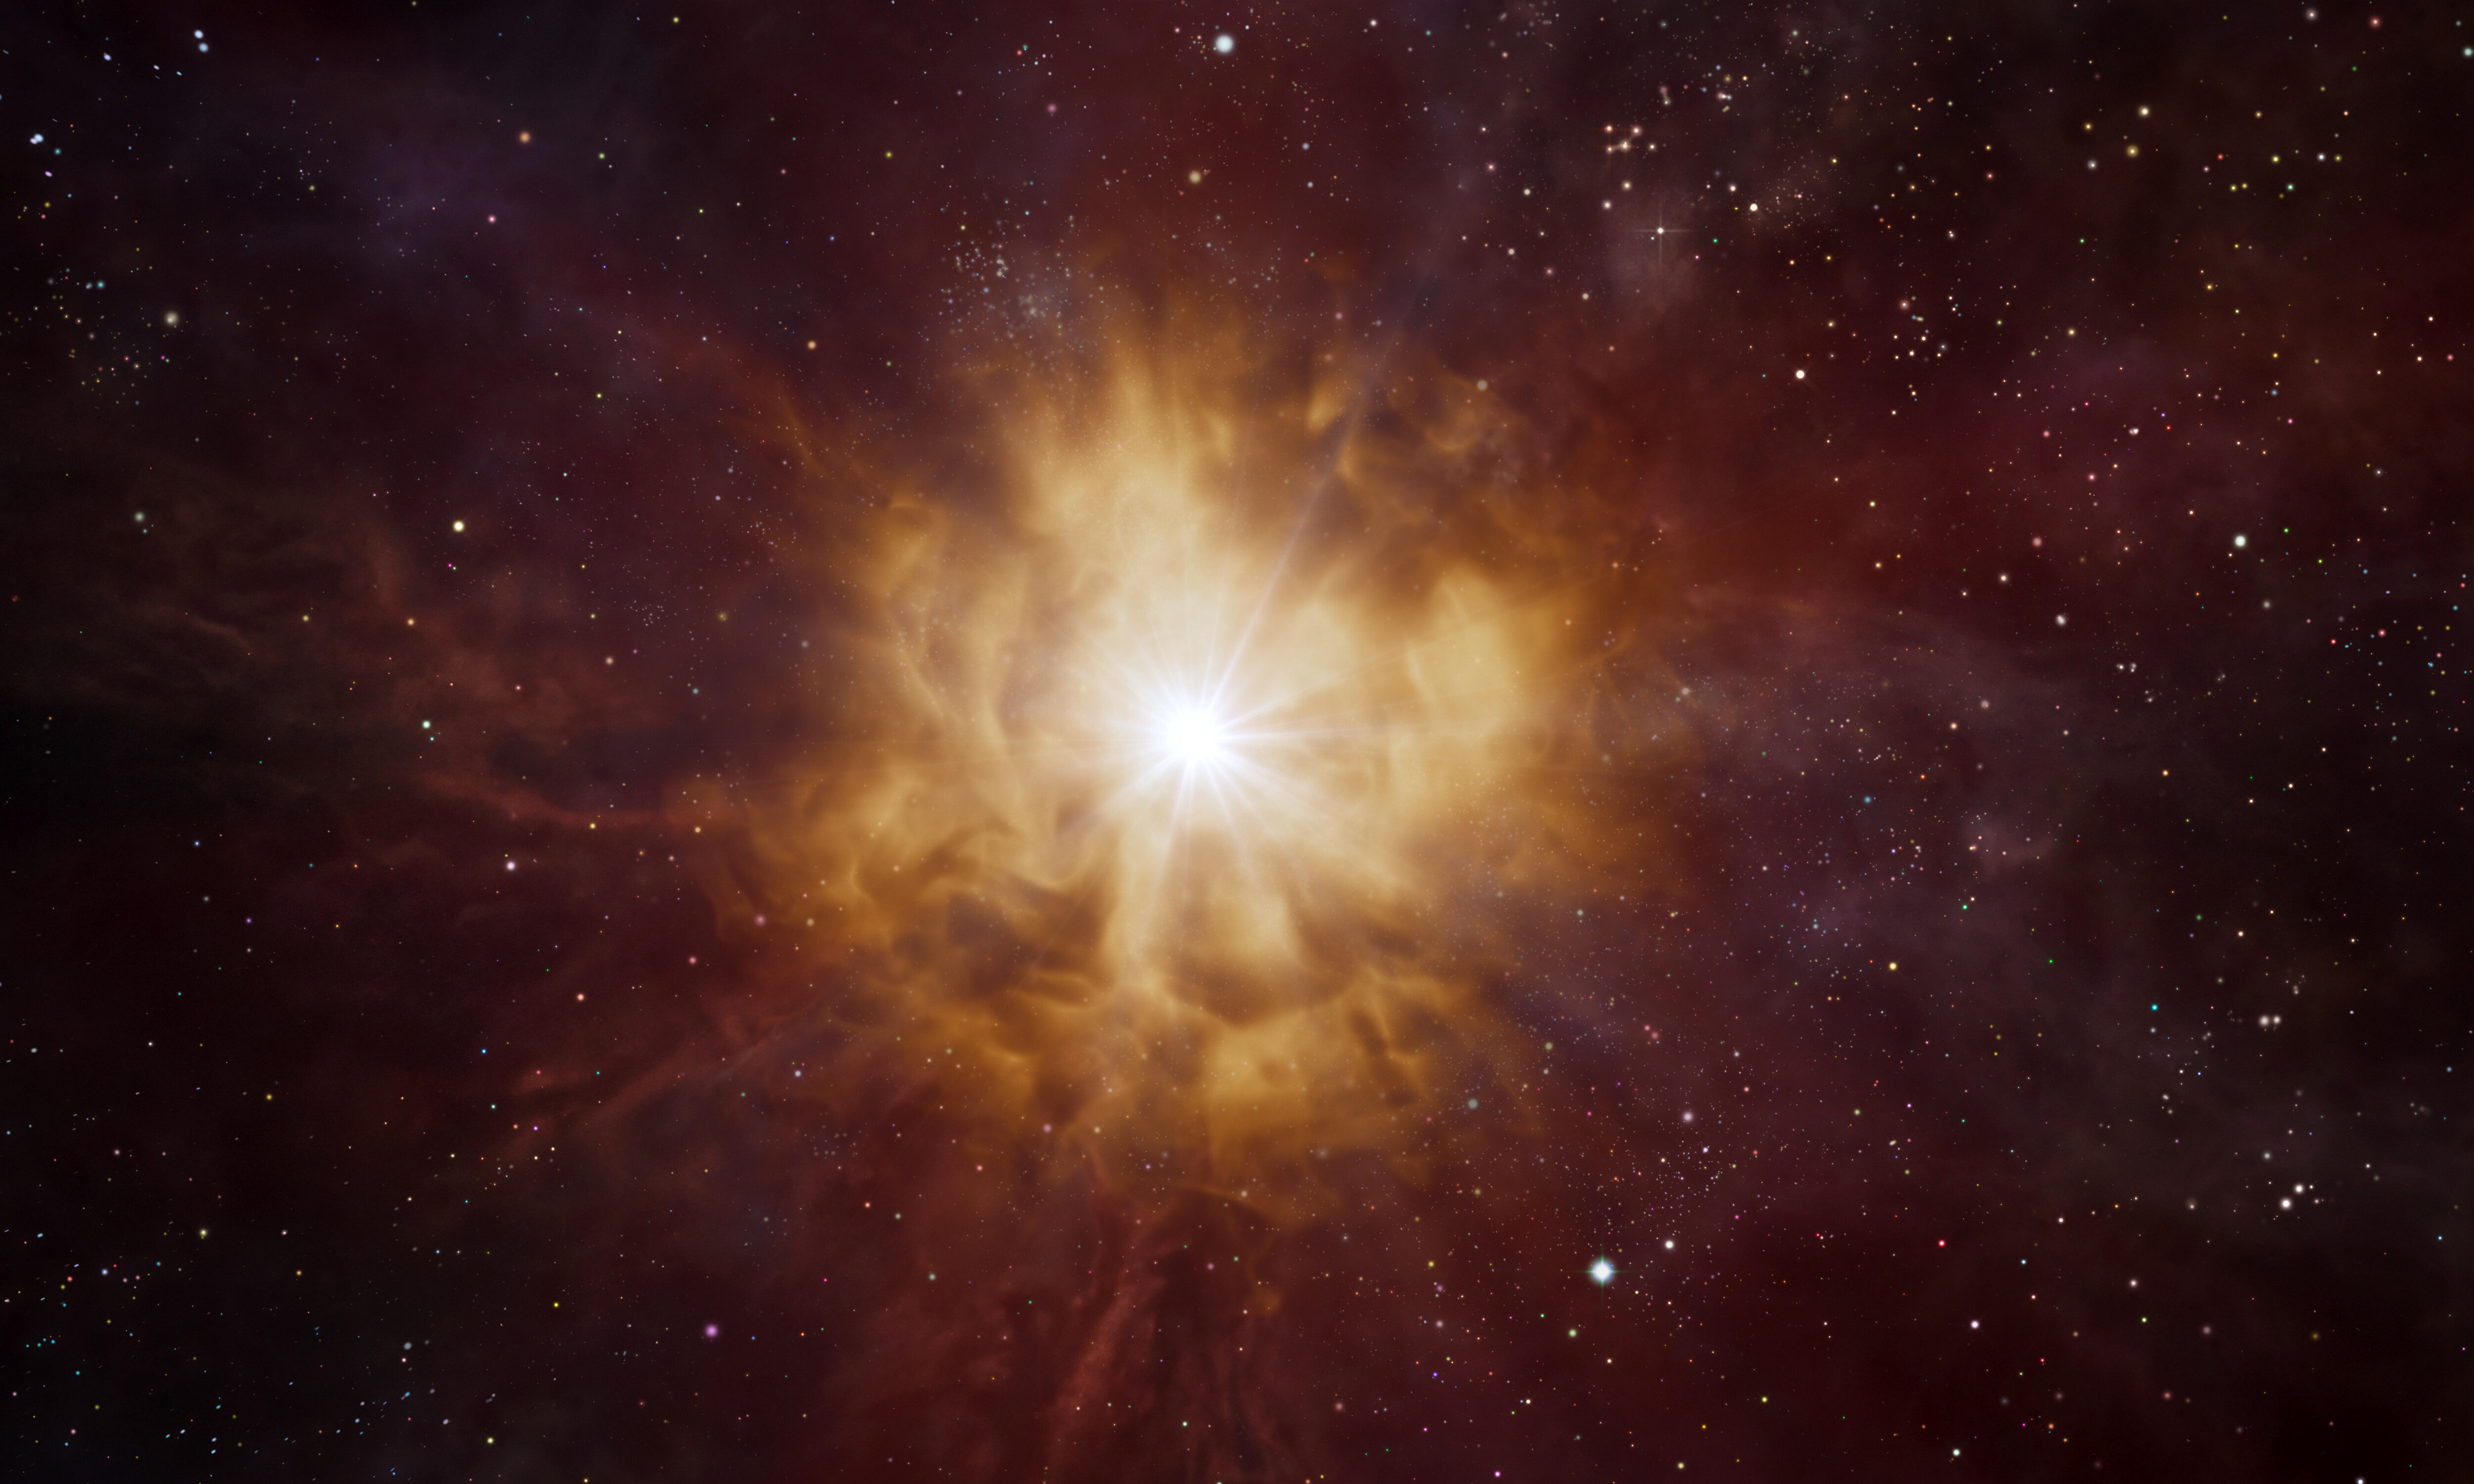 This artist’s impression shows the bright core of a Wolf–Rayet star surrounded by a nebula of material which has been expelled by the star itself. Wolf–Rayet stars are hot and massive with lifespans of a few million years. They are thought to end in dramatic supernova explosions, ejecting the elements forged in their cores into the cosmos. Credit: ESO/L. Calçada